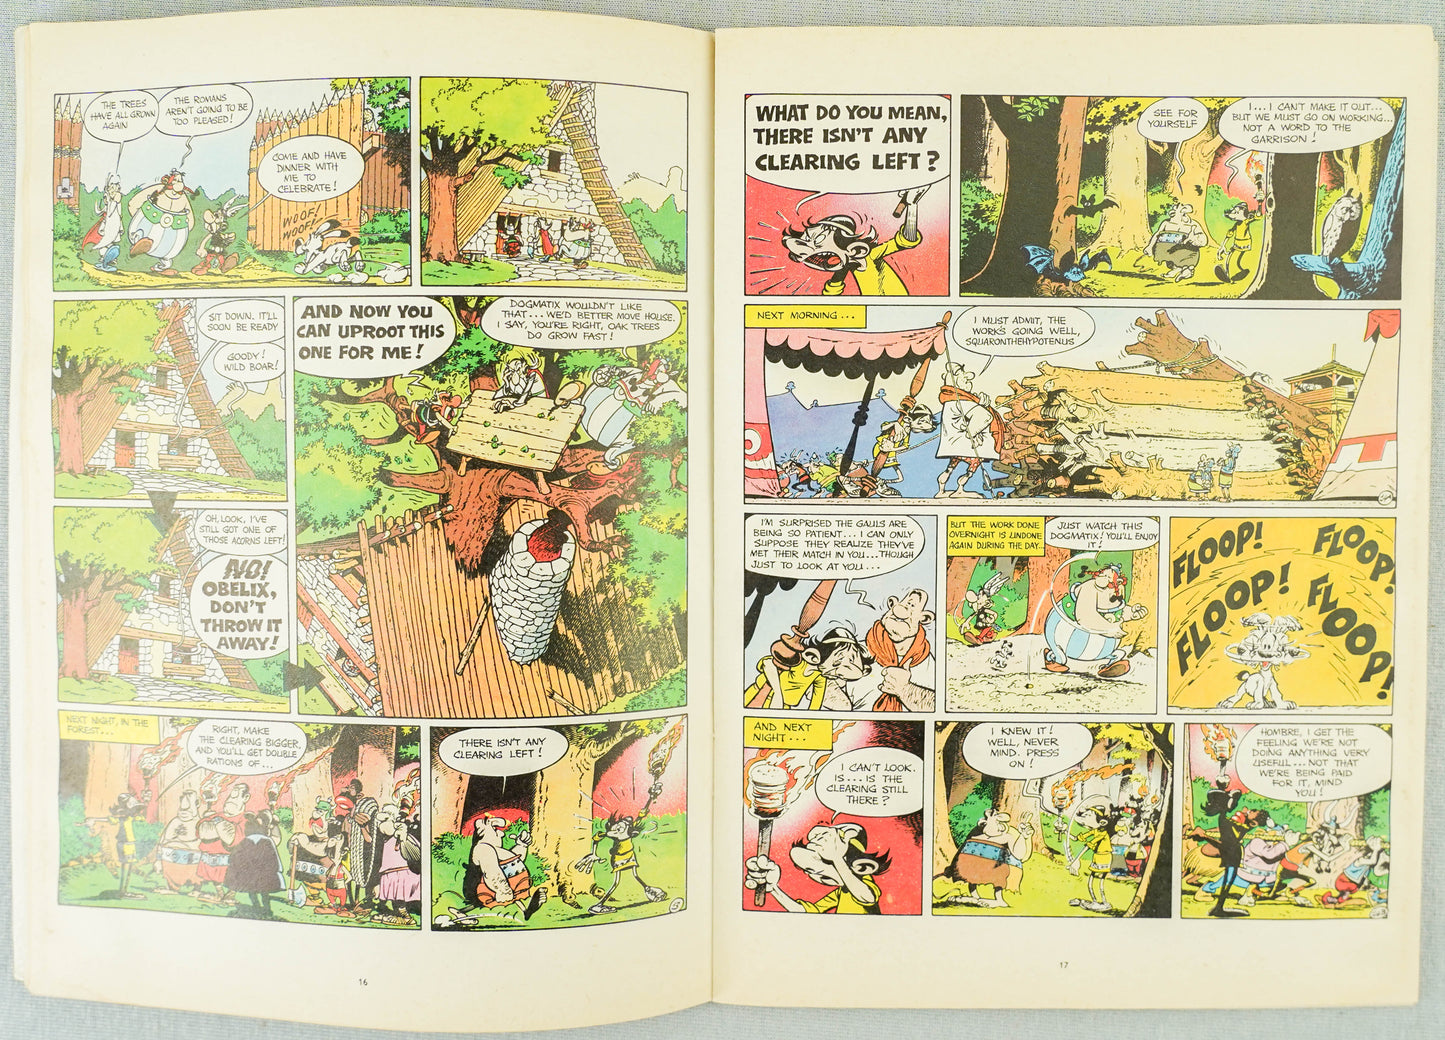 The Mansions of the Gods Vintage Mini A5 Asterix Book UK Paperback Edition Uderzo